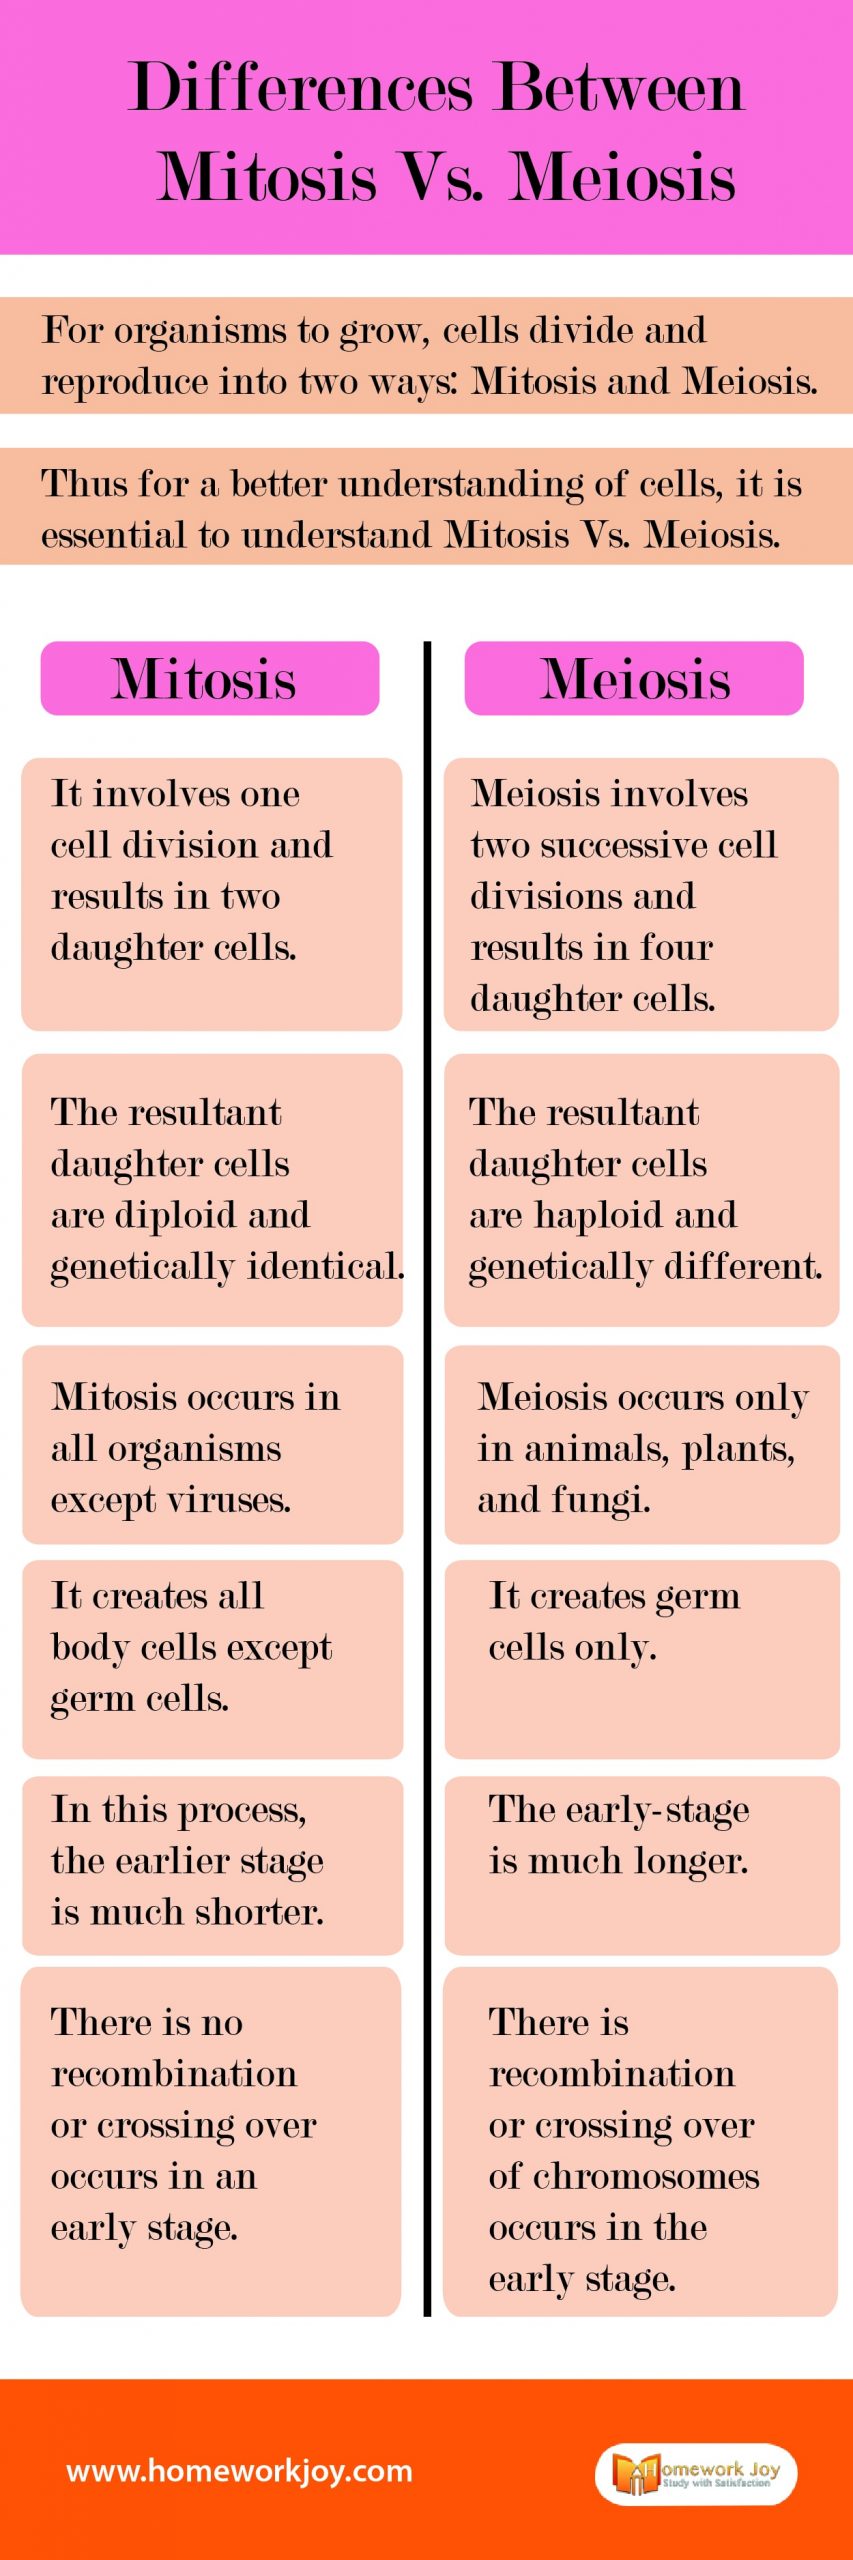 Differences Between Mitosis Vs. Meiosis-011